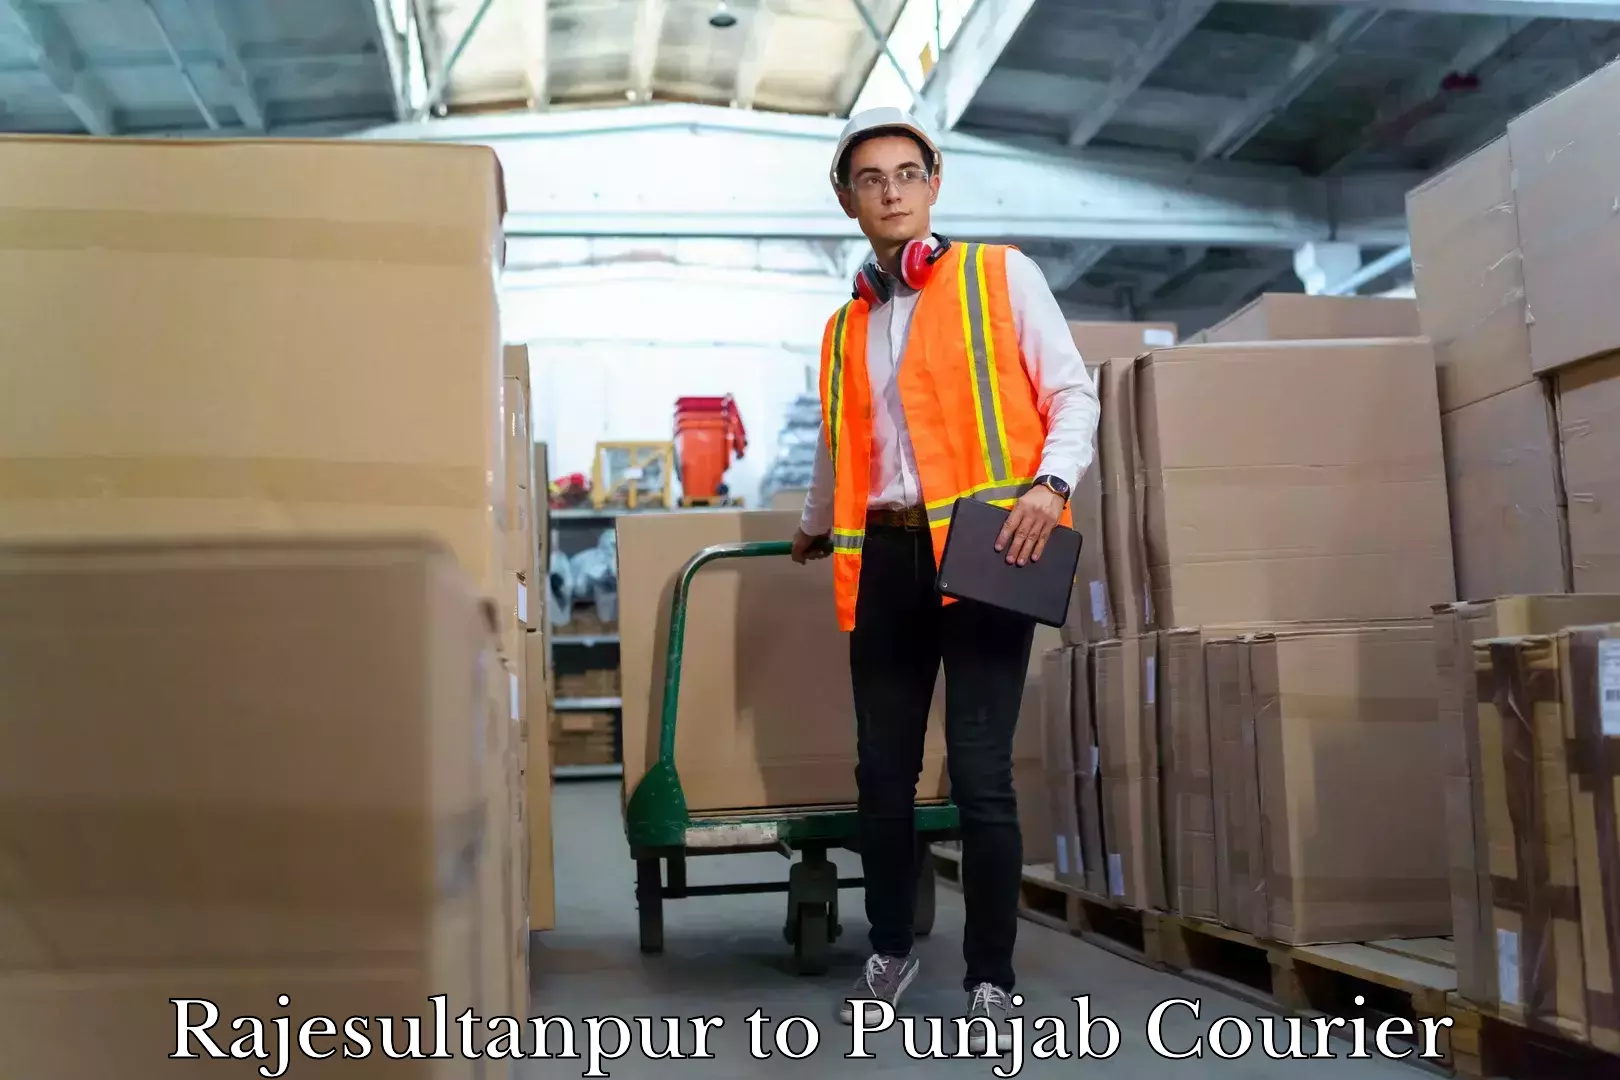 Specialized moving company Rajesultanpur to Punjab